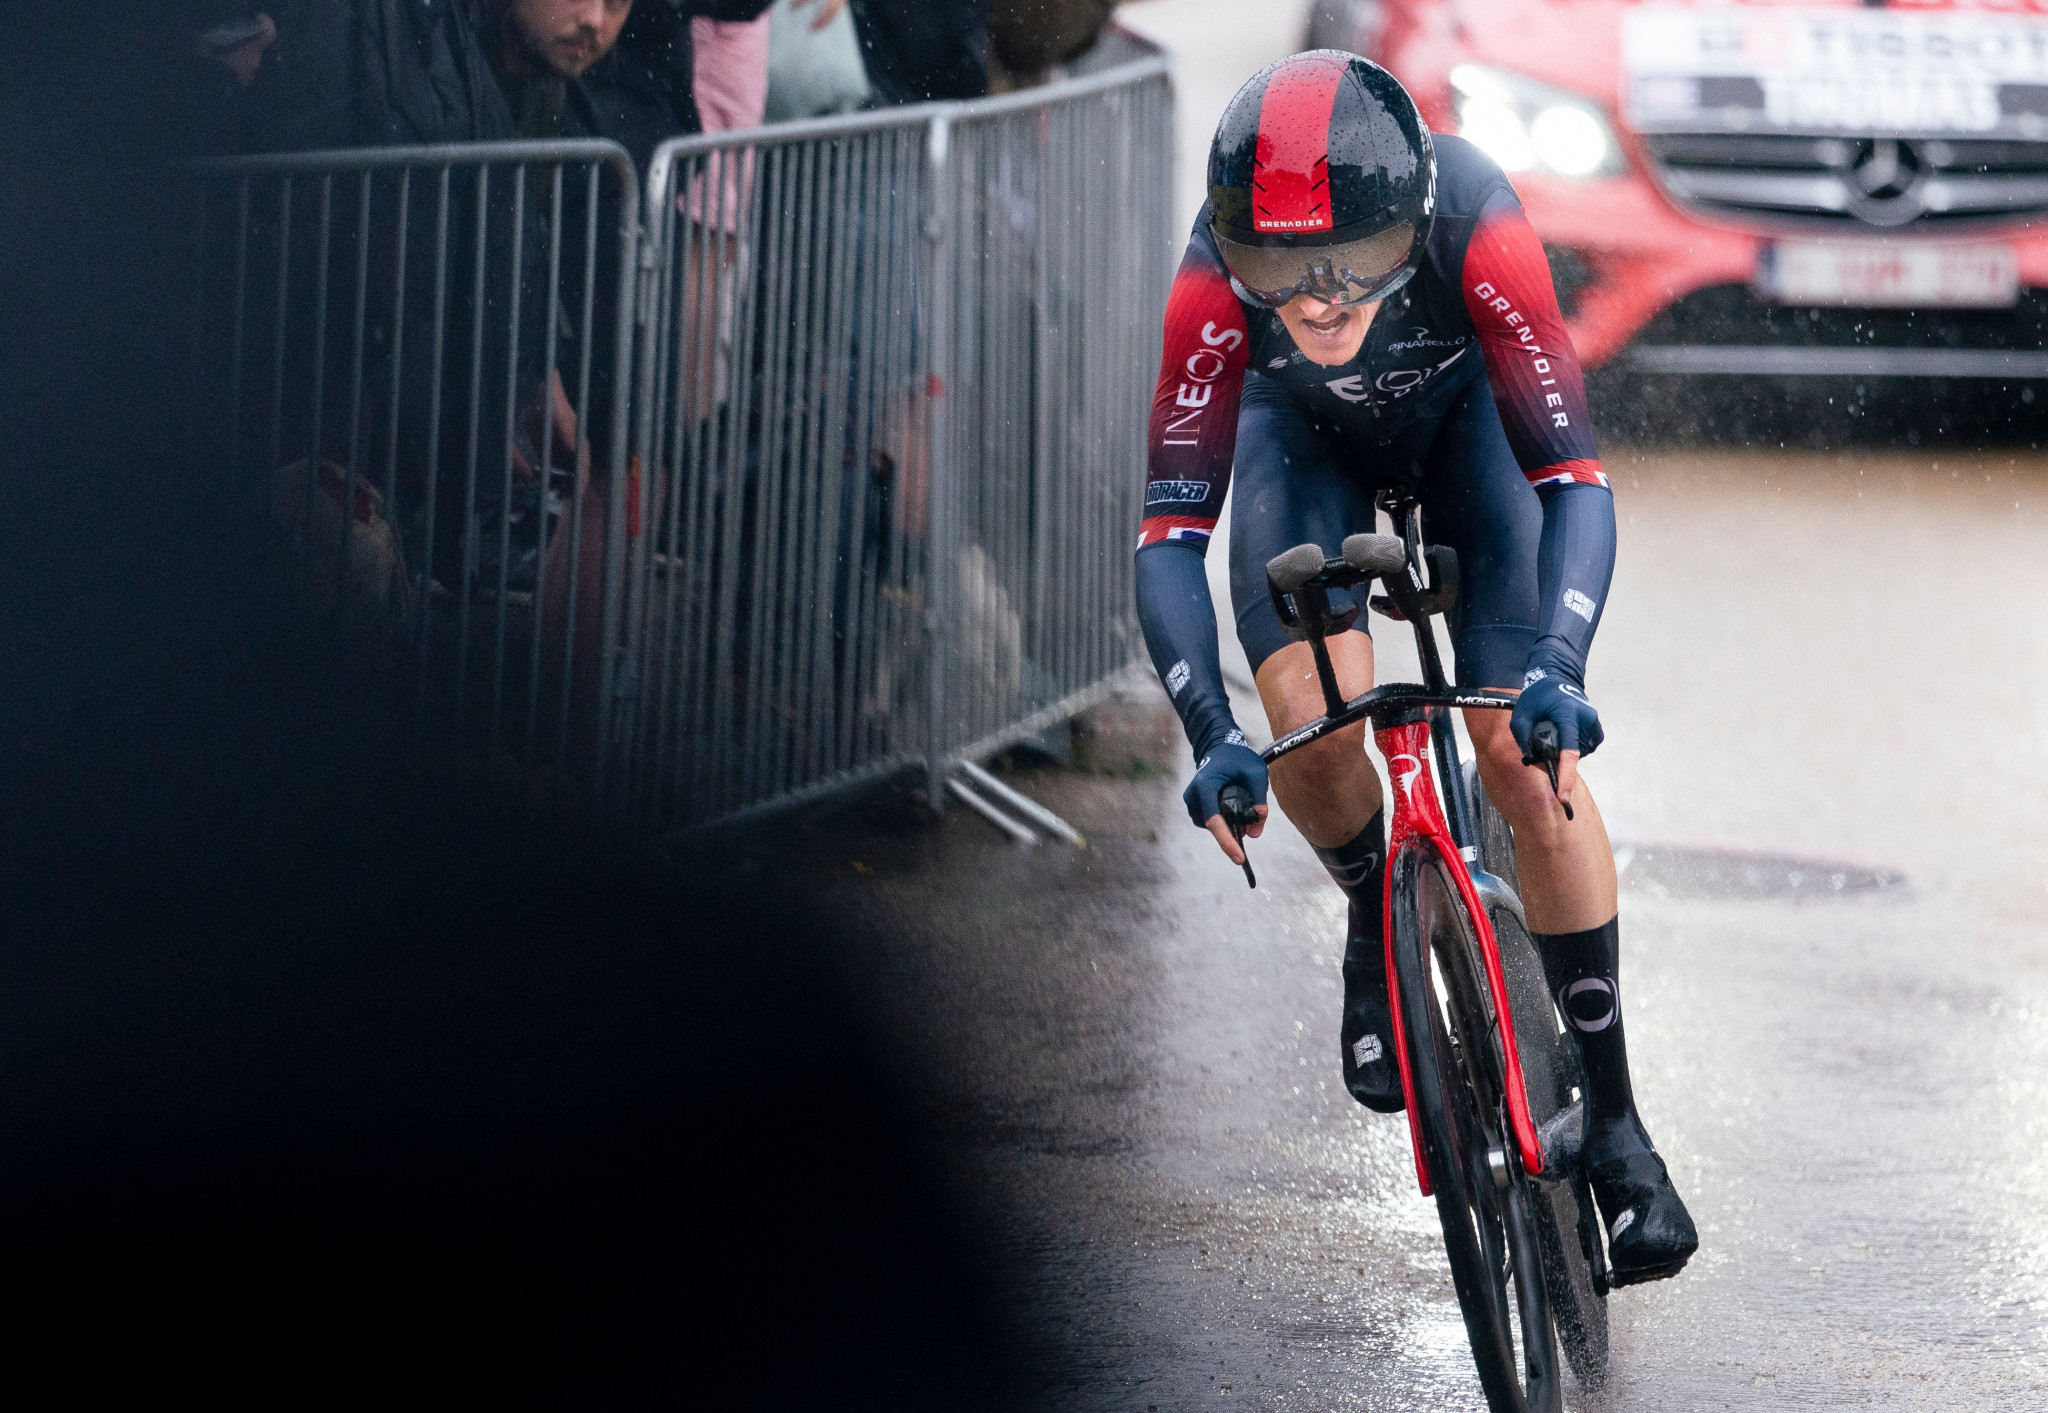 Thomas and Dennis head-to-head expected in road cycling time trial at Birmingham 2022